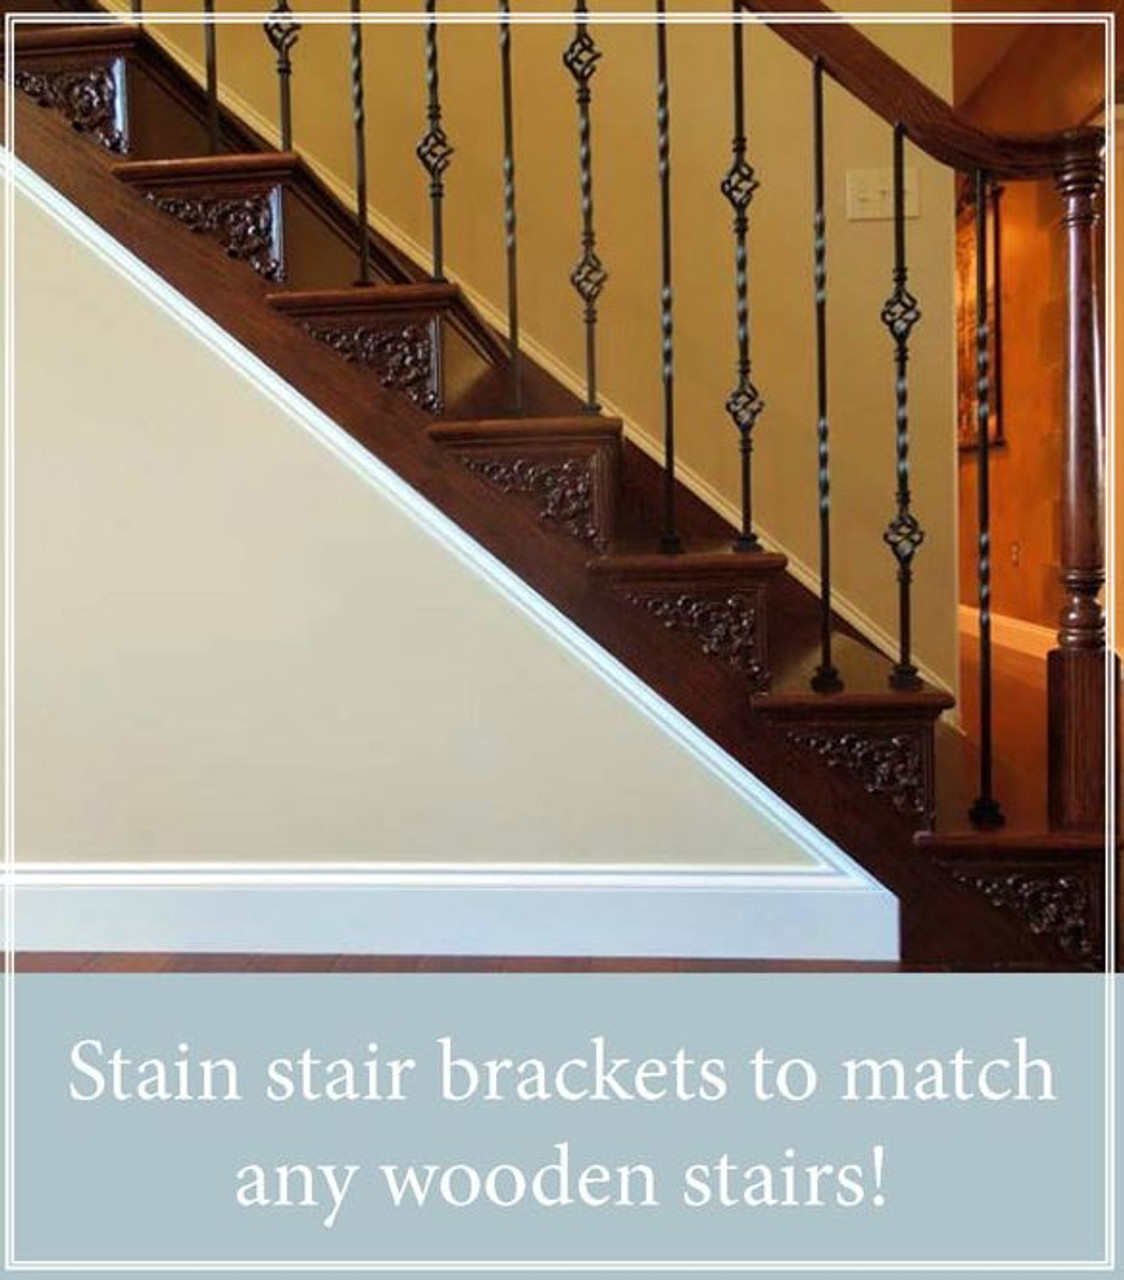 Stair Brackets can be stained or painted